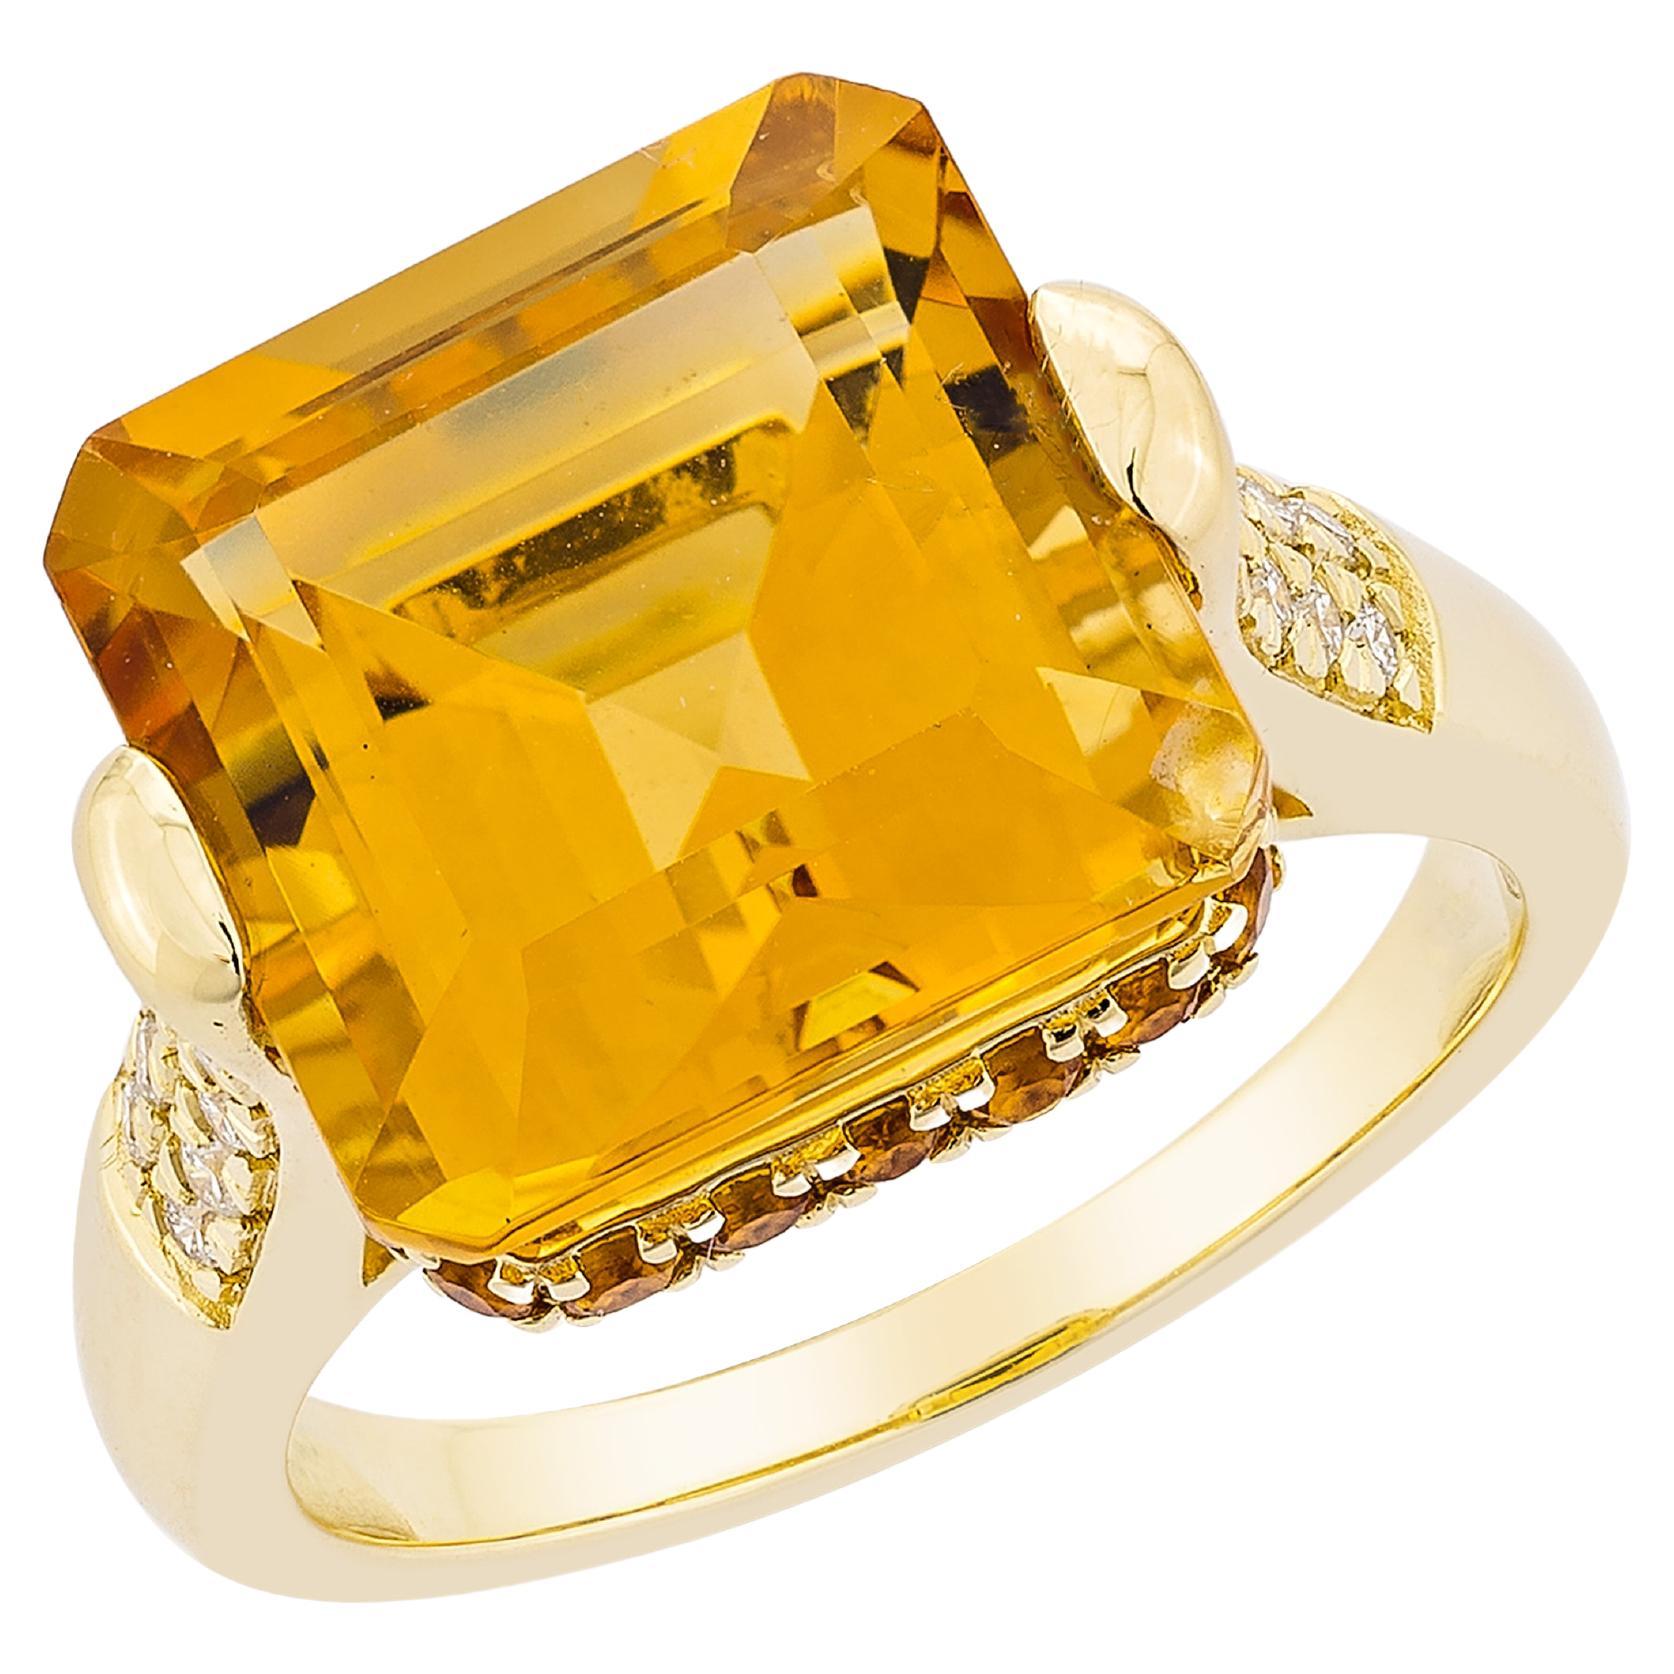 7.92 Carat Citrine Fancy Ring in 18Karat Yellow Gold with White Diamond.   For Sale